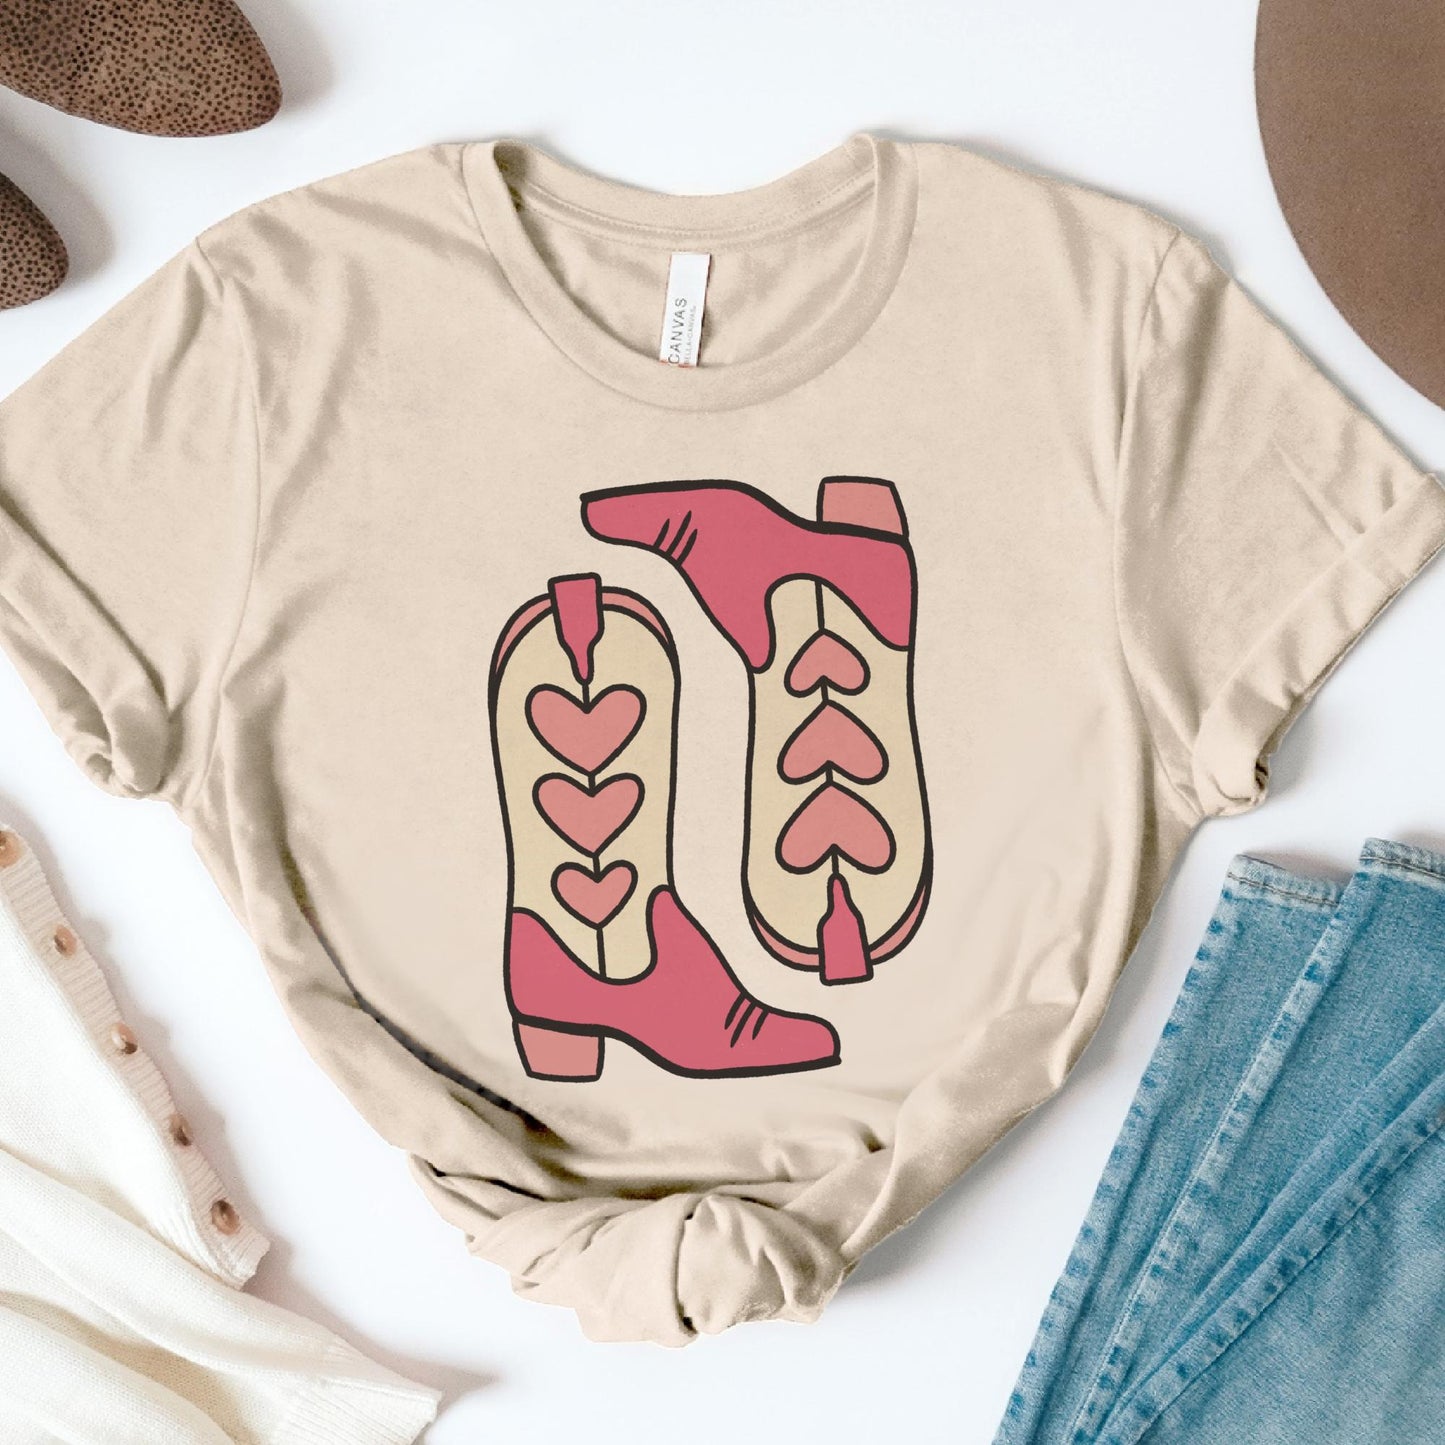 Valentine Country Western T-shirt Vday Cowgirl Country Heart Boots Tee Cowboy Western V-day Tshirt Cowboy Tshirt Western Boot Shirt Womens Western Tee Sublimation Cowgirl Tshirt  Valentine Western Tee V-day Western Tshirt Cowgirl Boots Tee Casual Cute